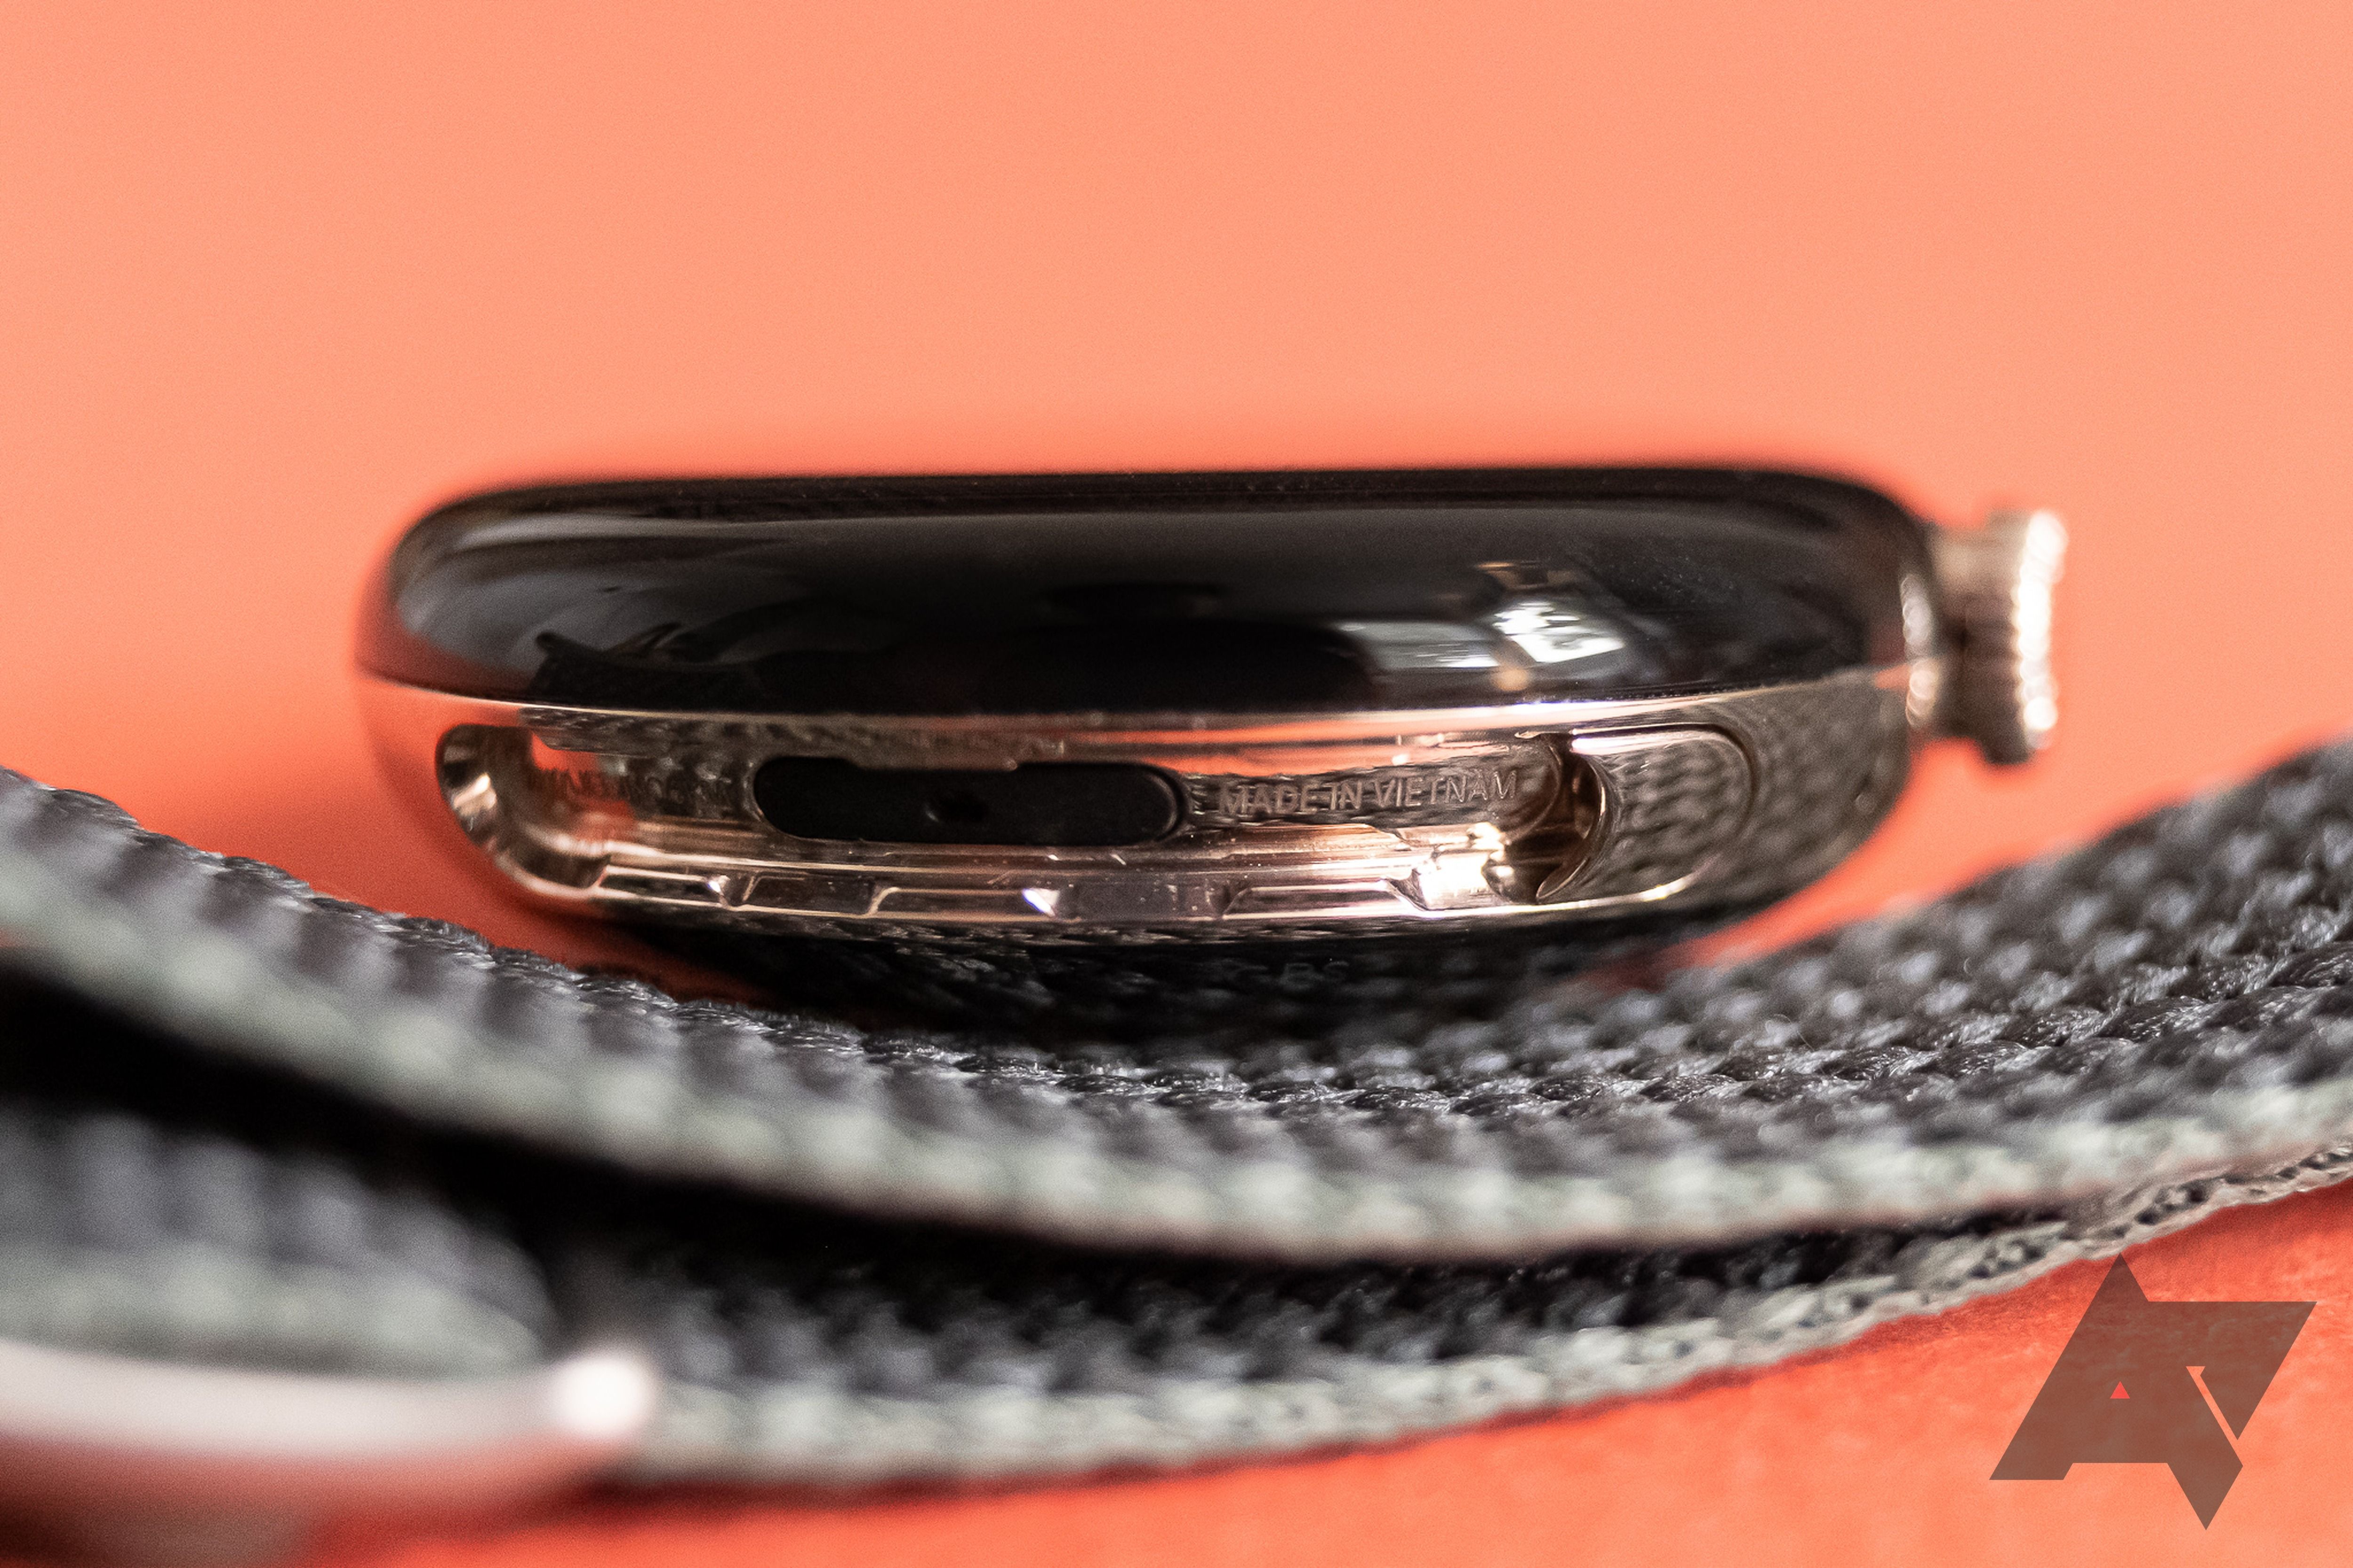 A detail photo of a smartwatch's band mechanism.